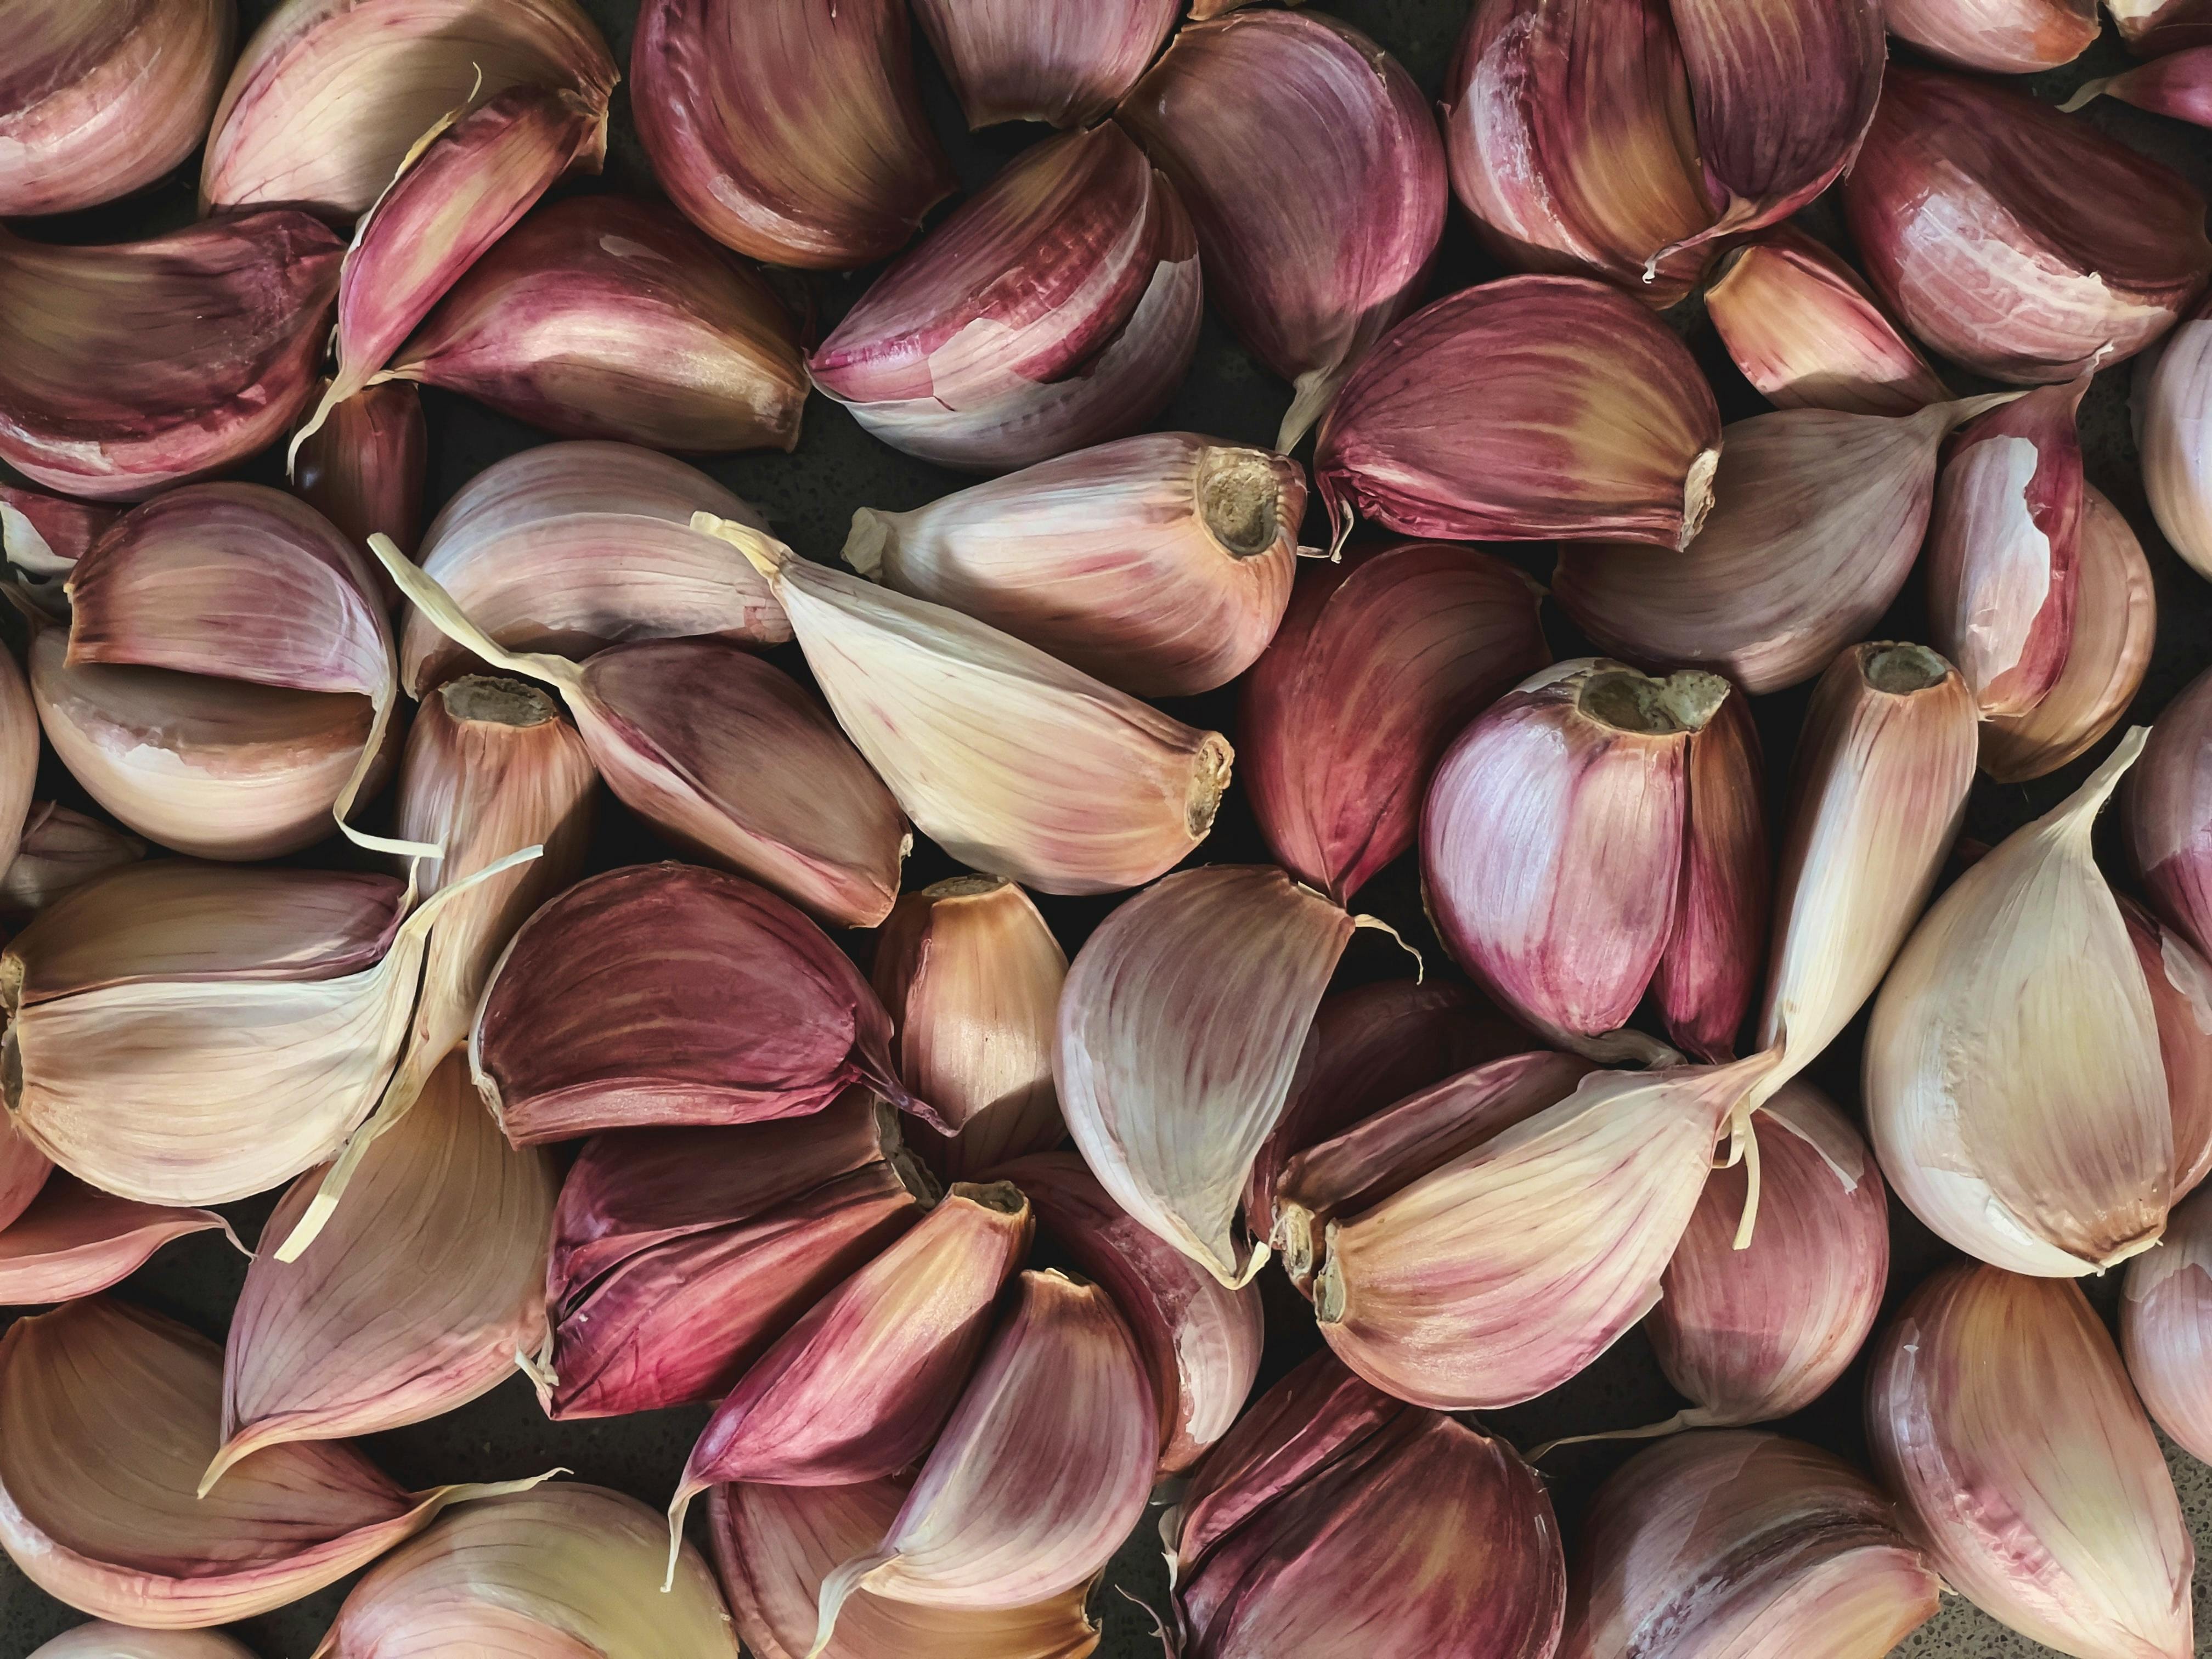 Saltwire food critic Mark DeWolf suggests paying attention to the quality of garlic you use for cooking.